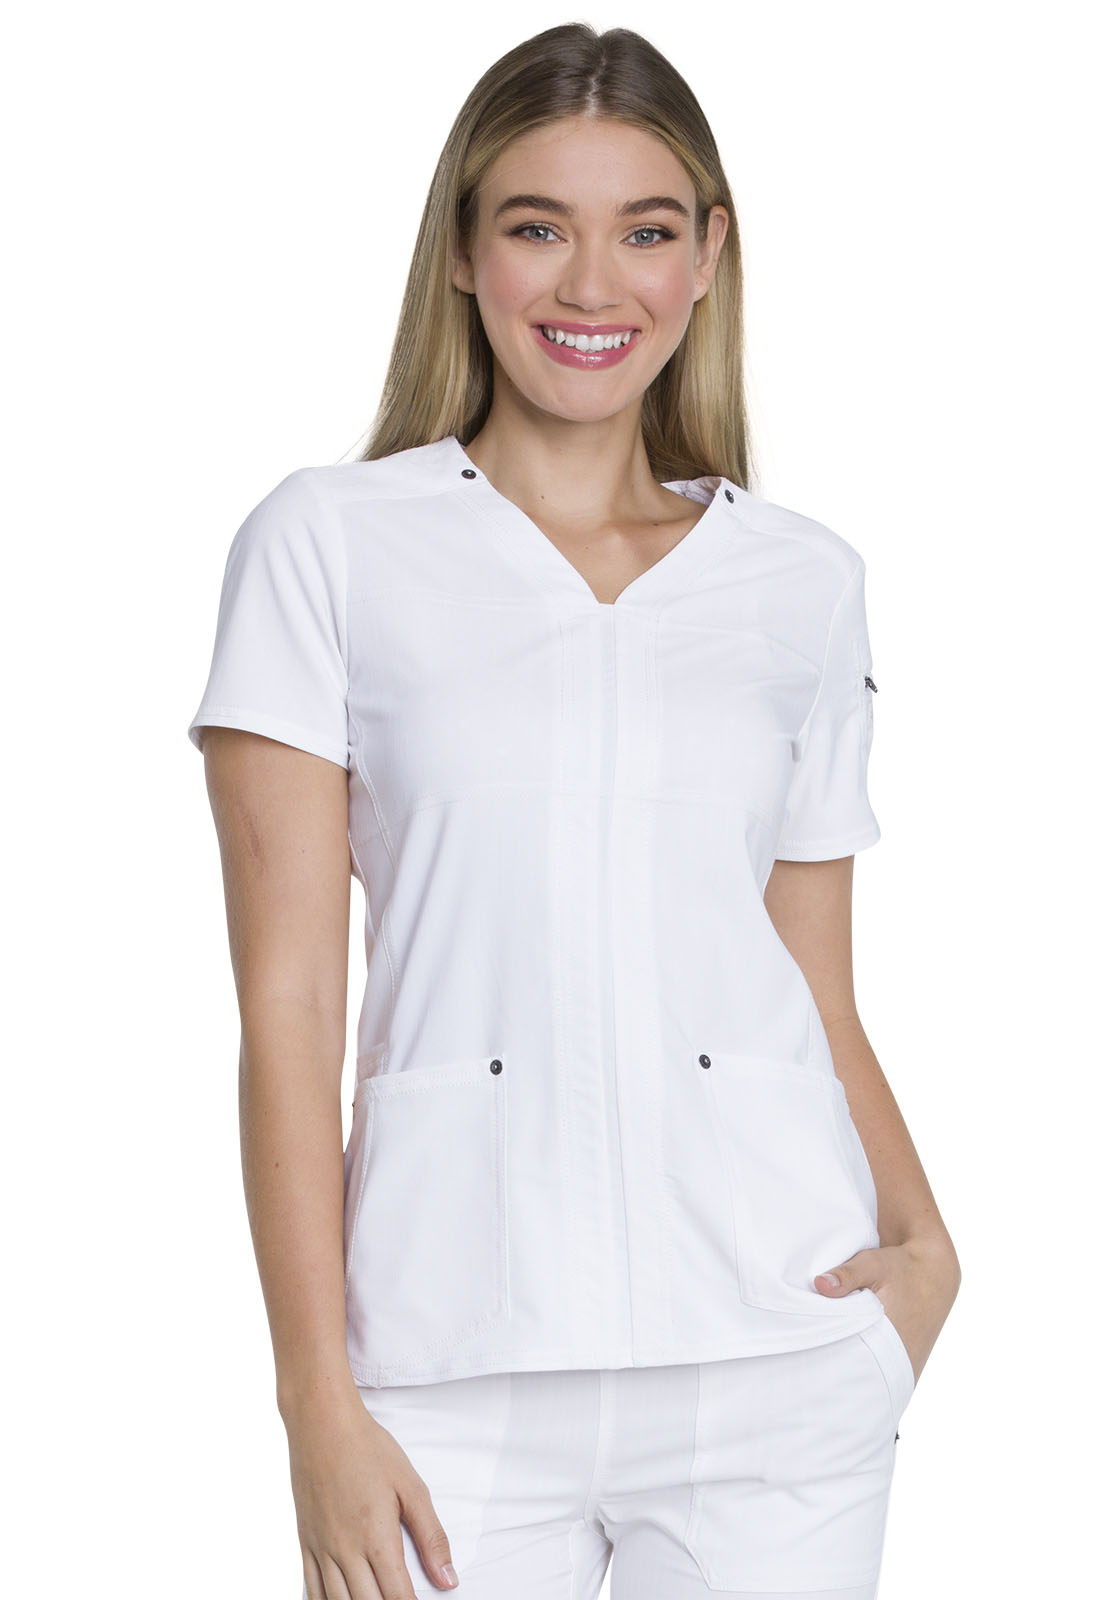 Dickies Advance V-Neck Top in White from Dickies Medical